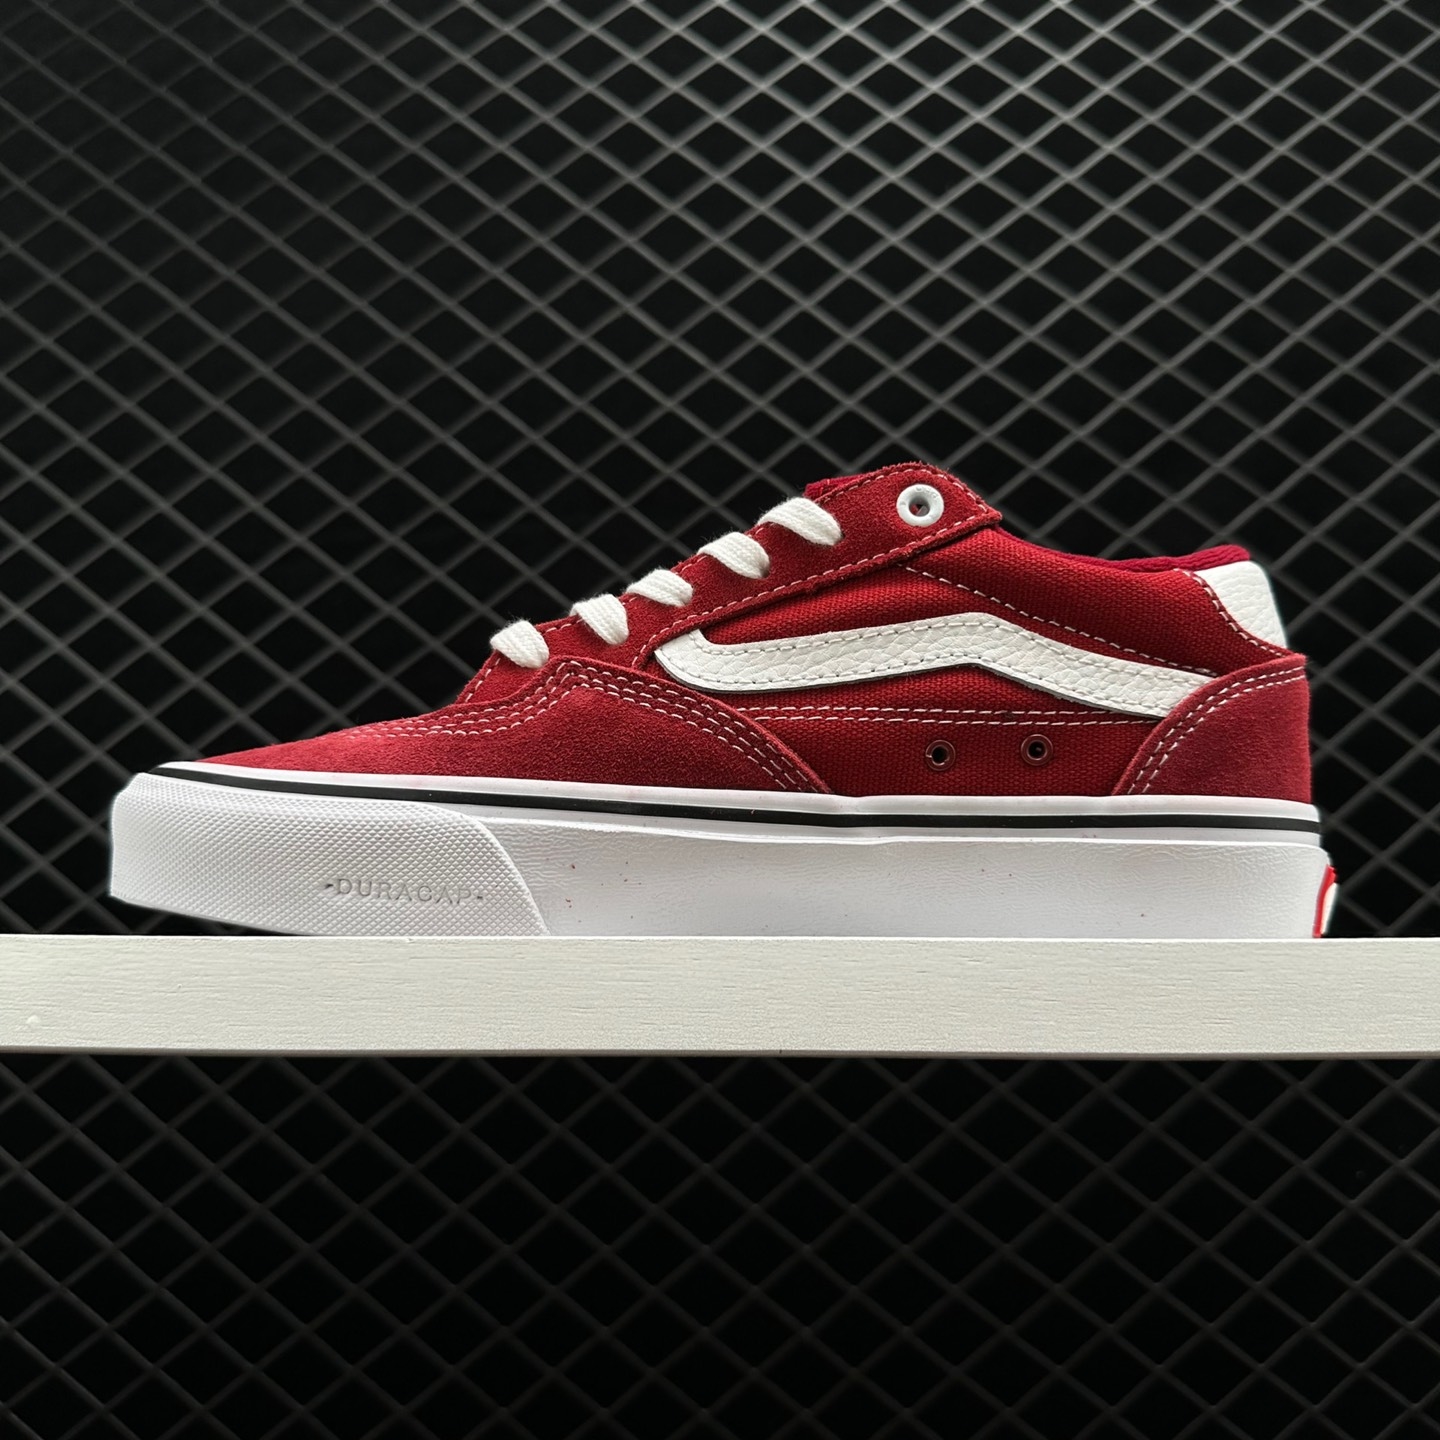 Vans Rowan Pro Wine Red VN0A4TZC2PV - Stylish and Durable Skate Shoes!